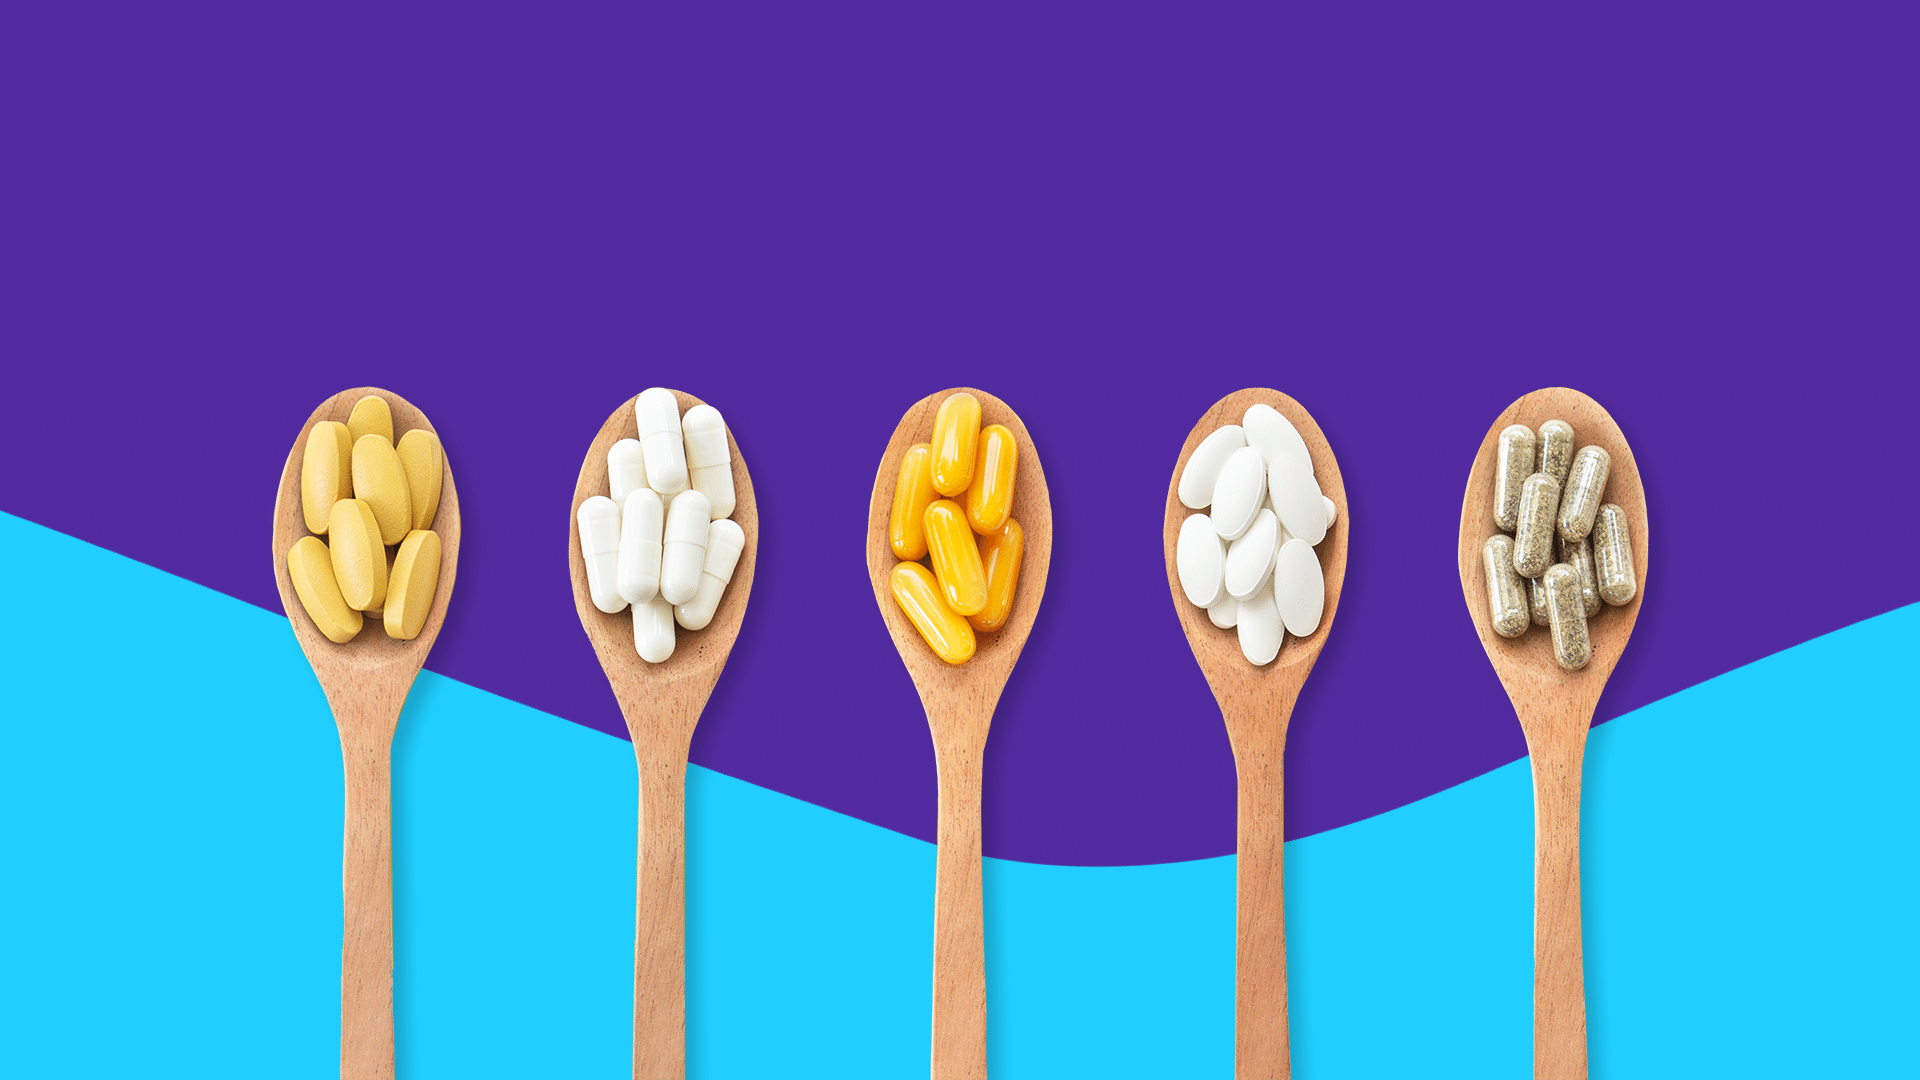 Spoons with pills represents vitamin absorption